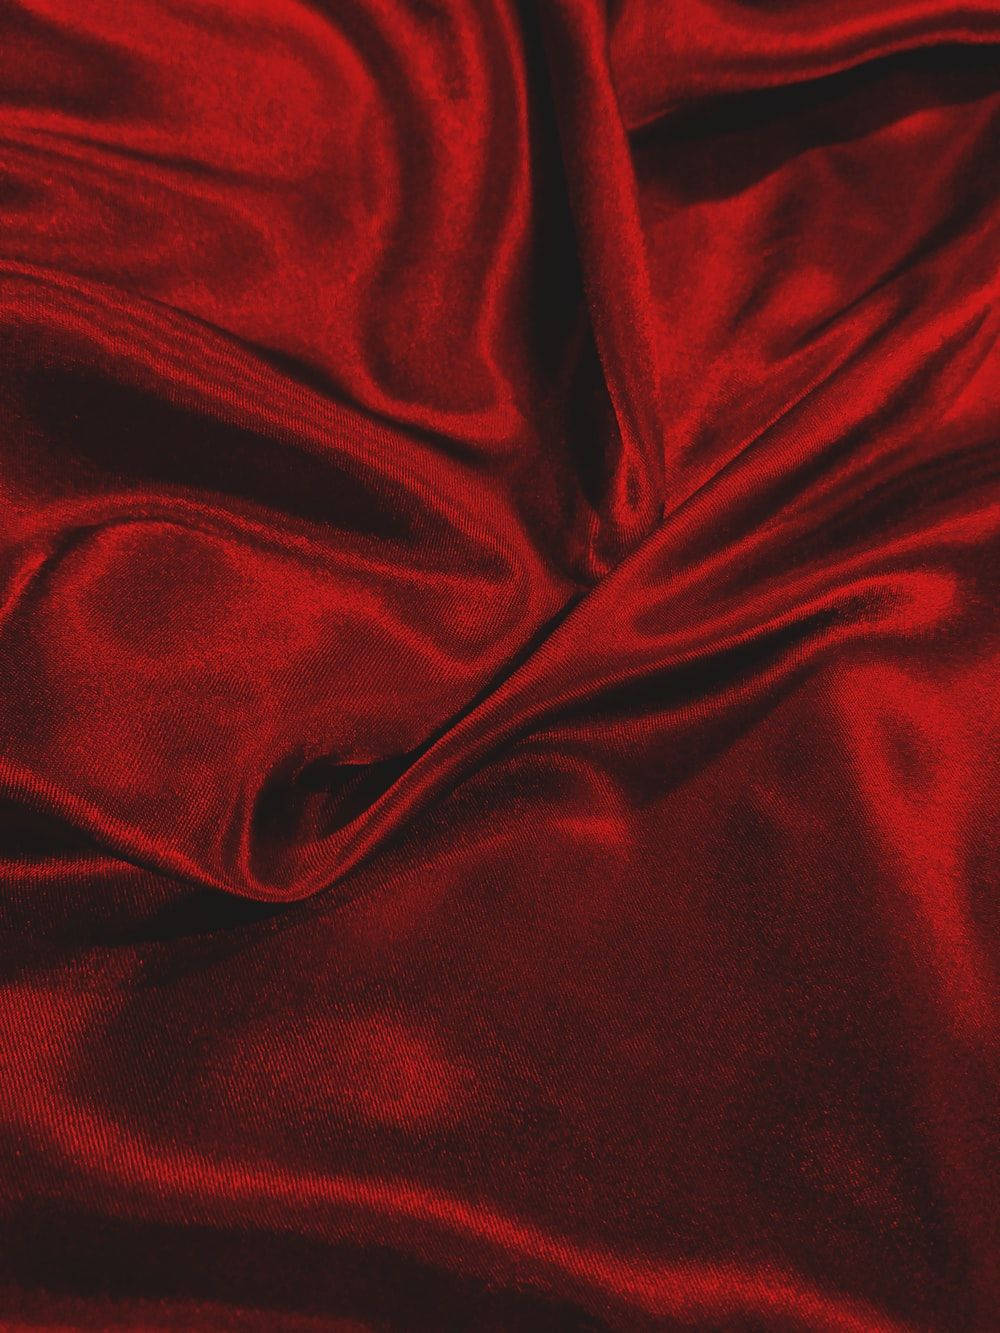 Pure Red Creased Silk Background